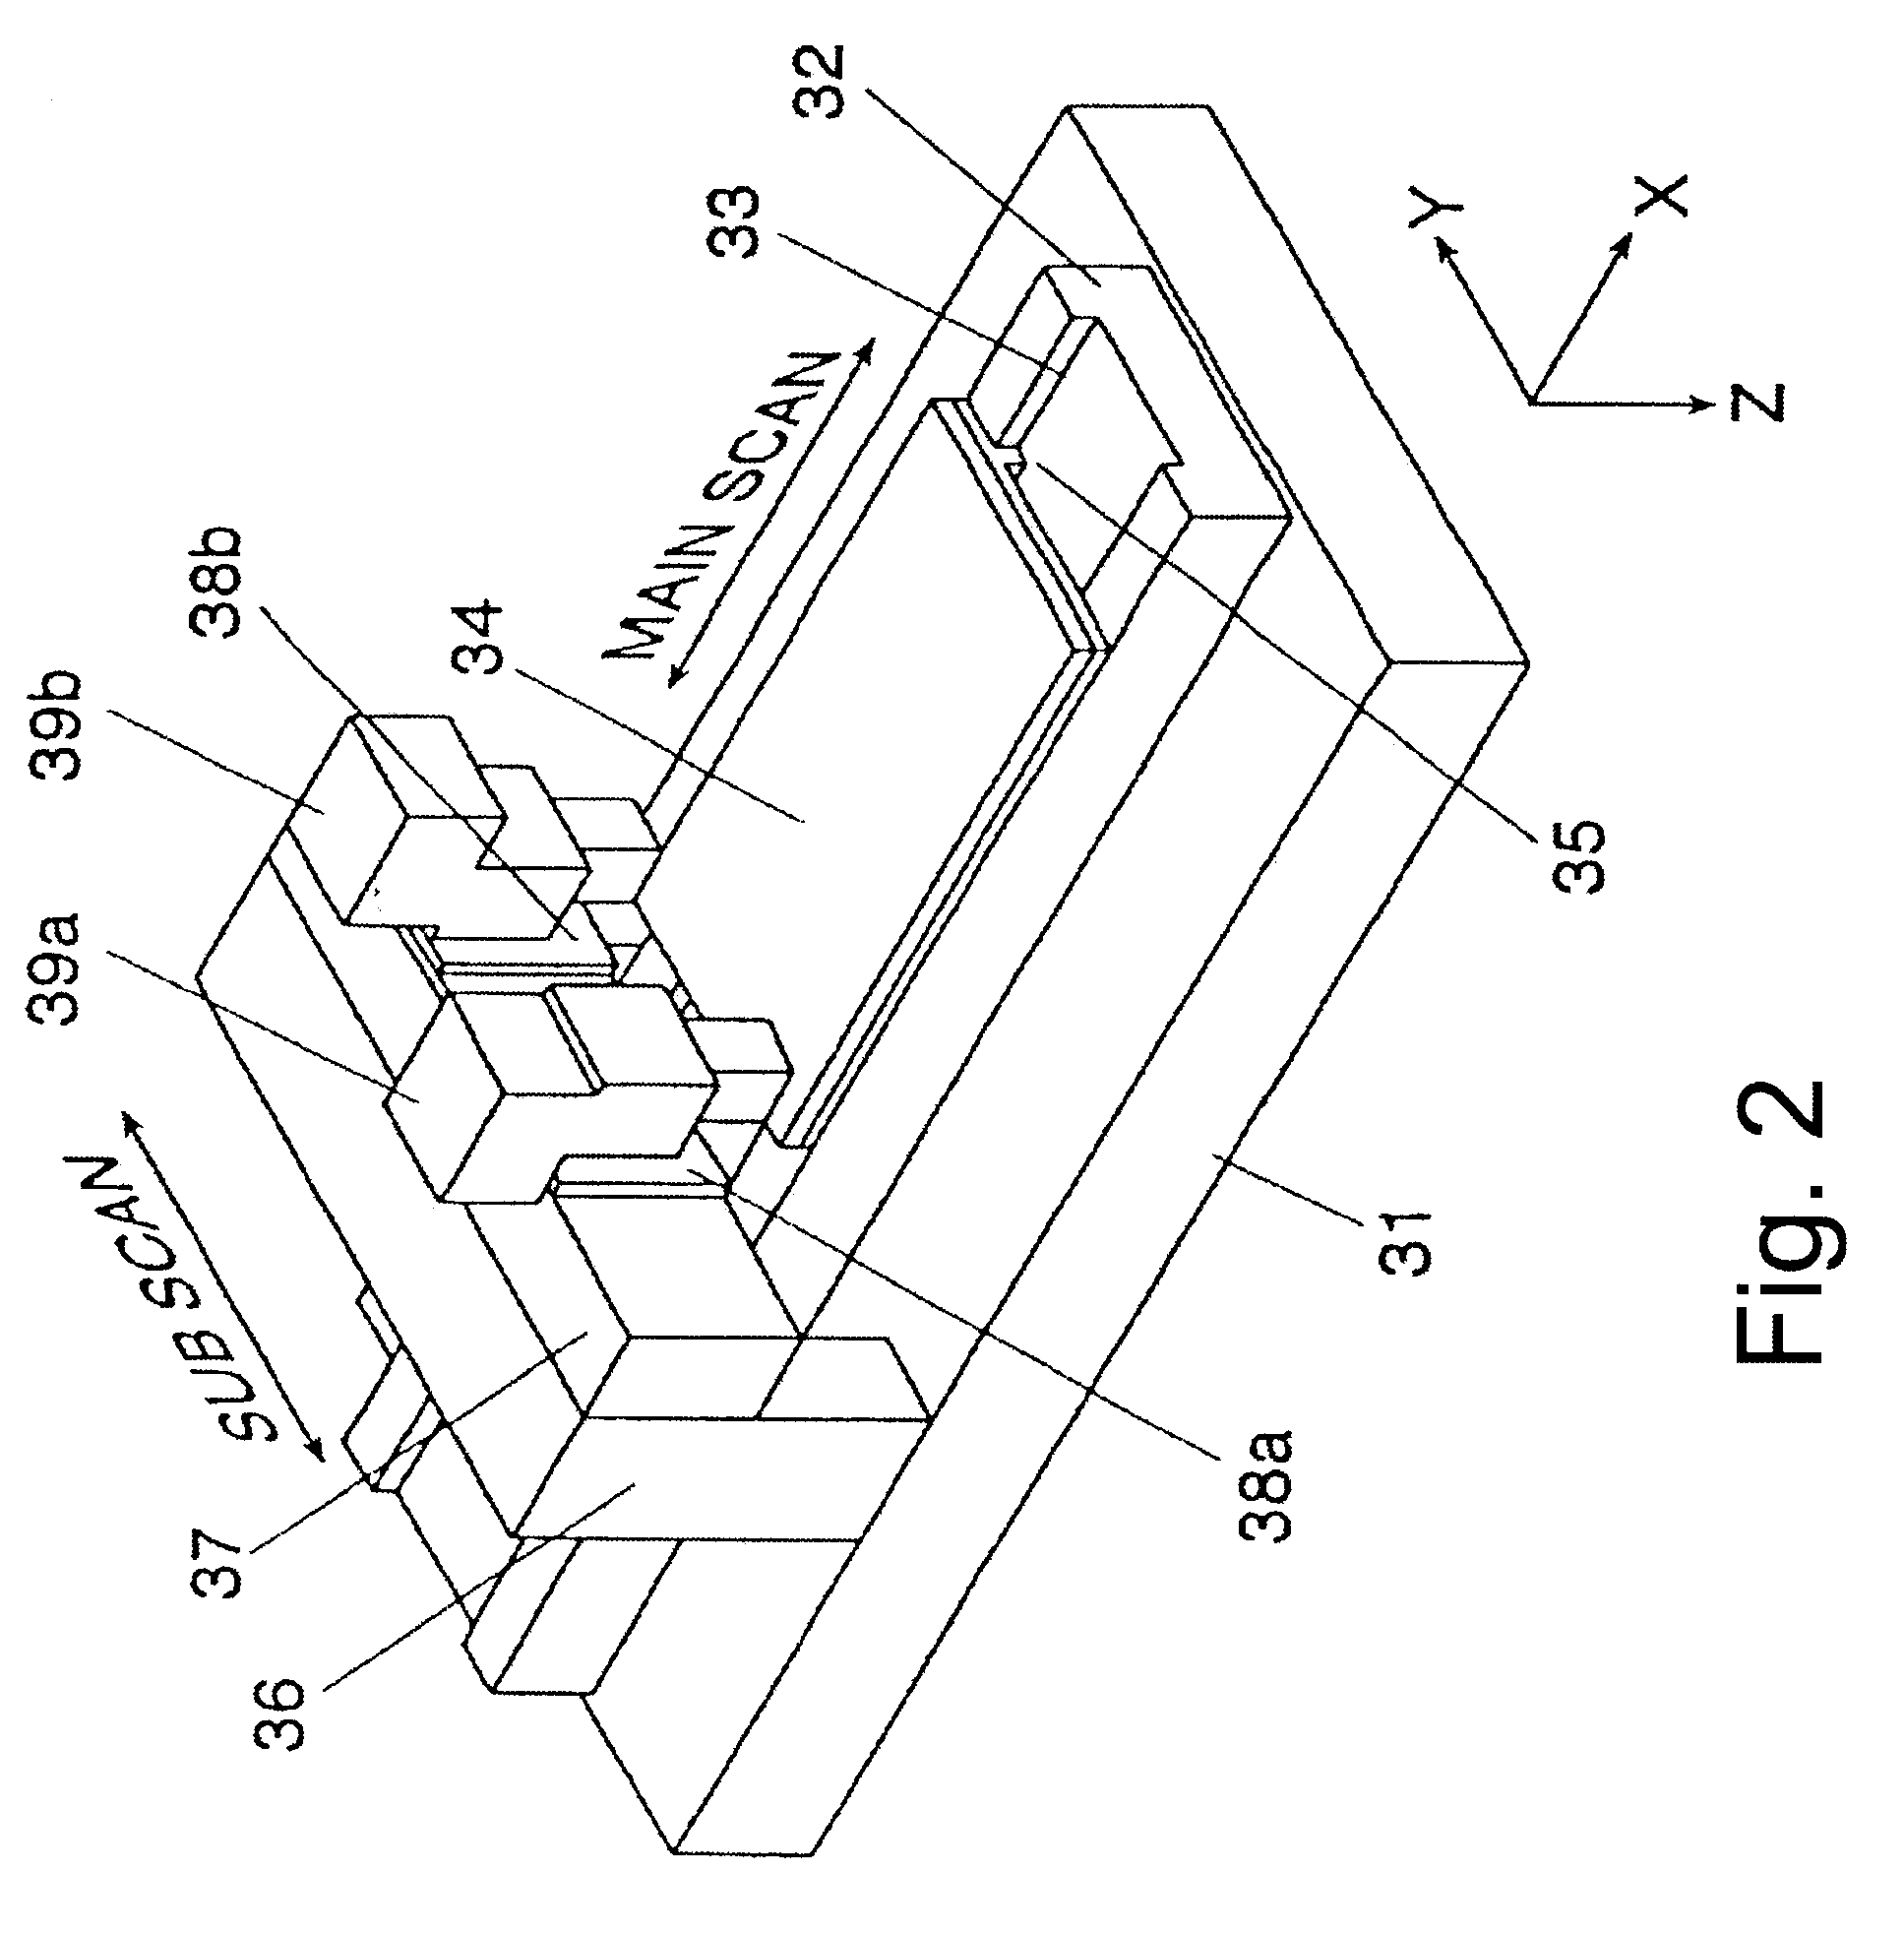 Method and apparatus for registration control in production by imaging